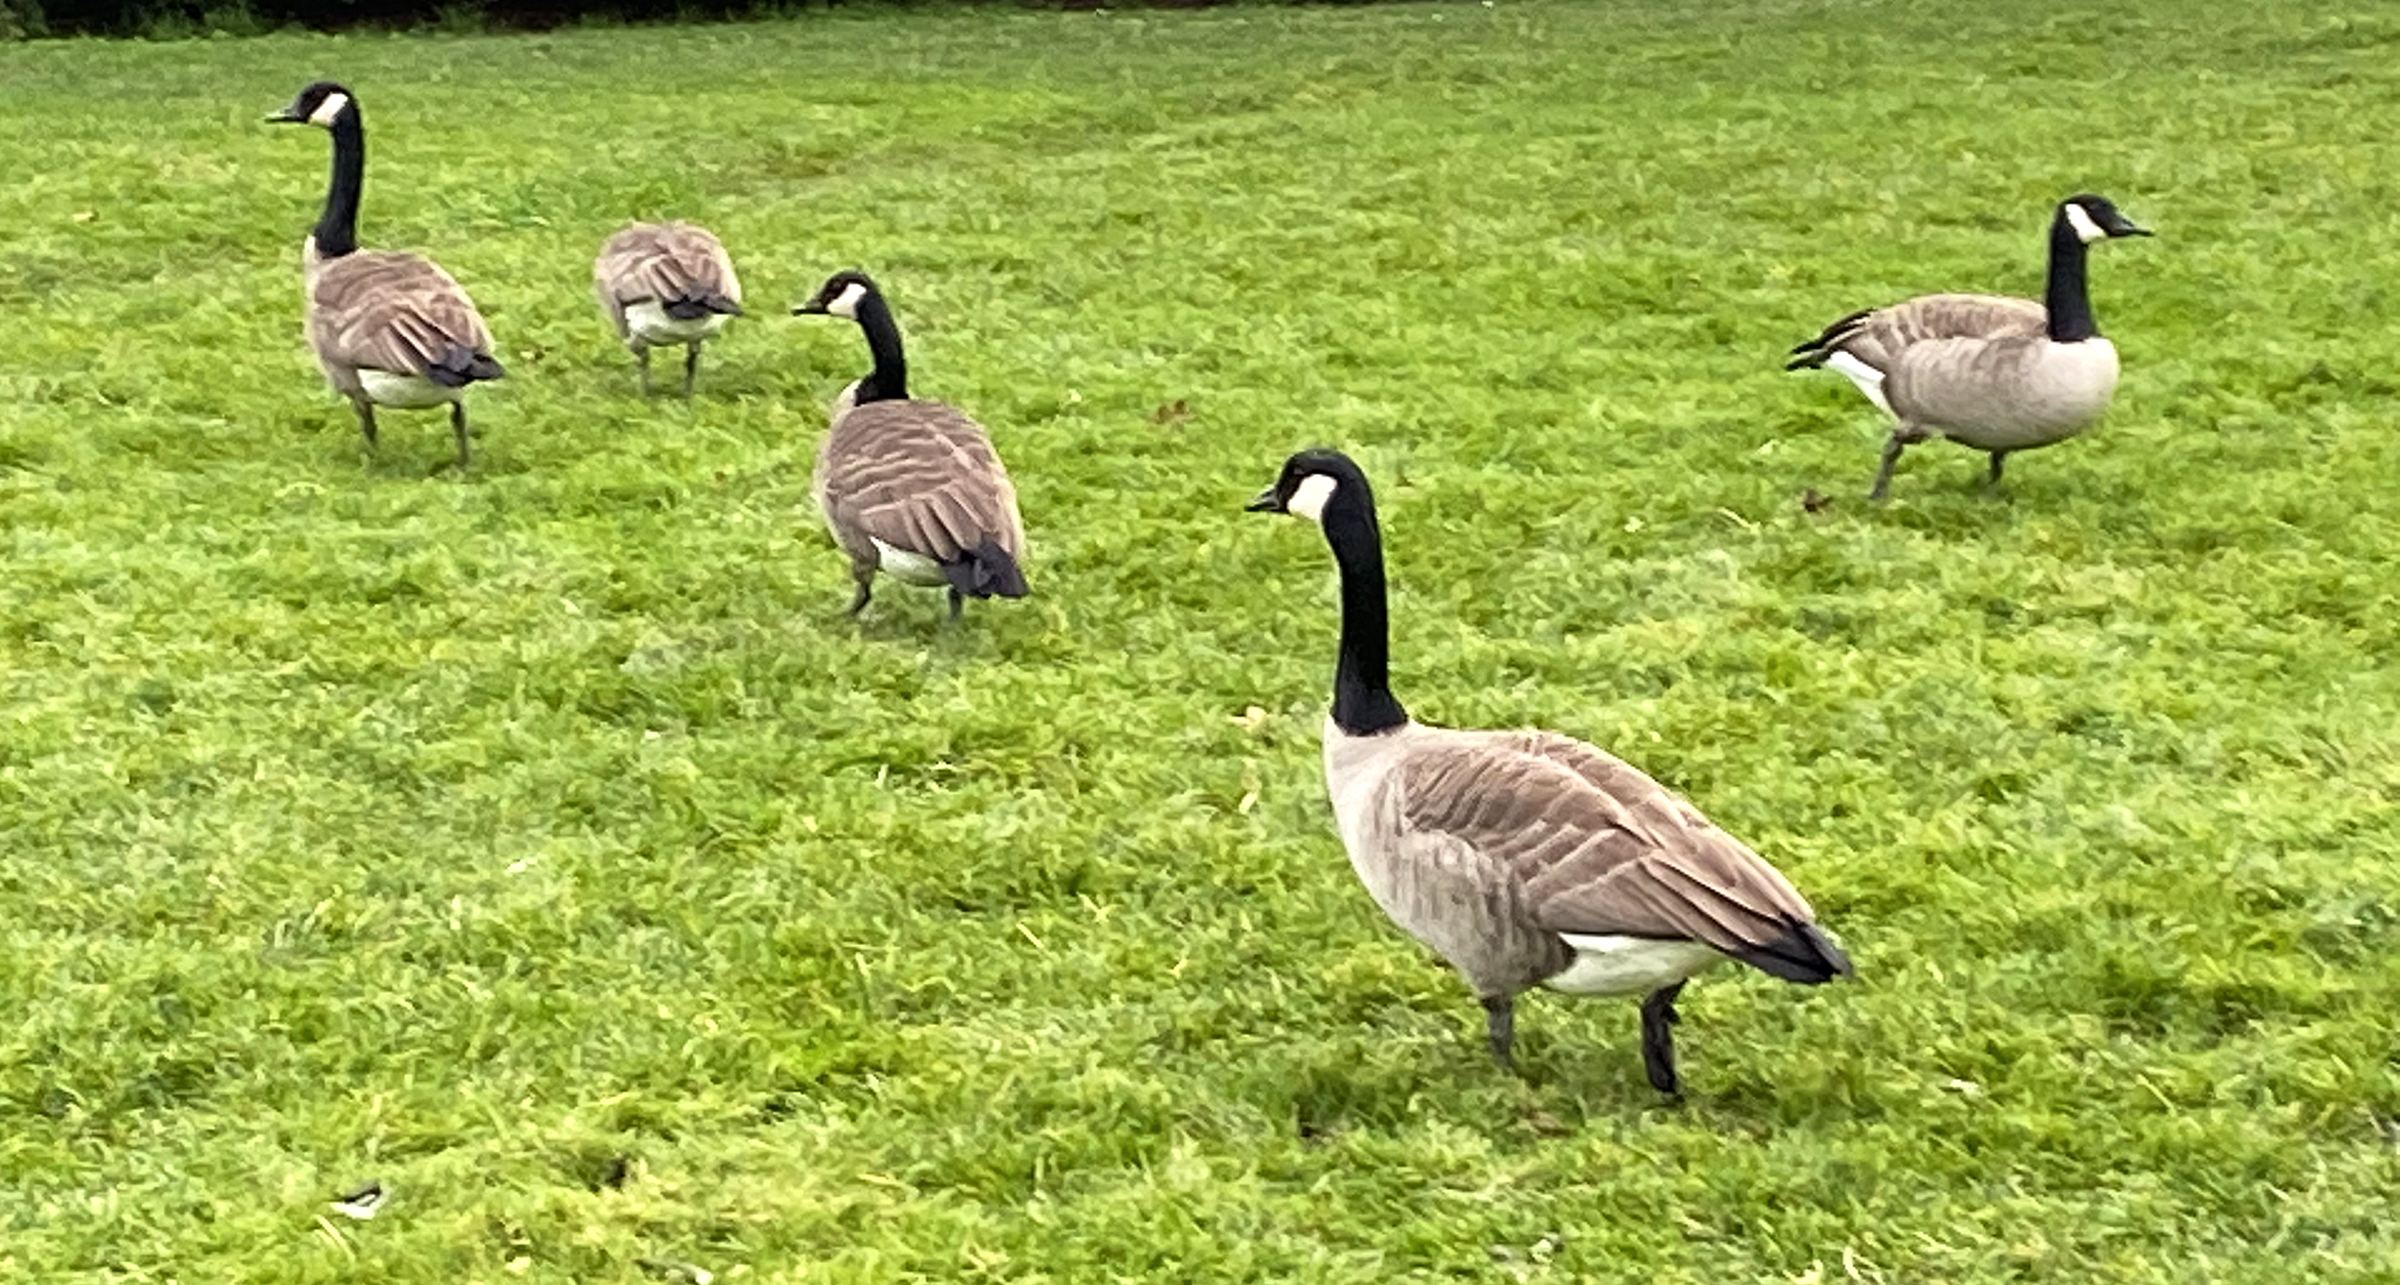 These Geese weren’t interested in an interview and their displeasure with the camera was evident. Photo by Carson Papke ISN 